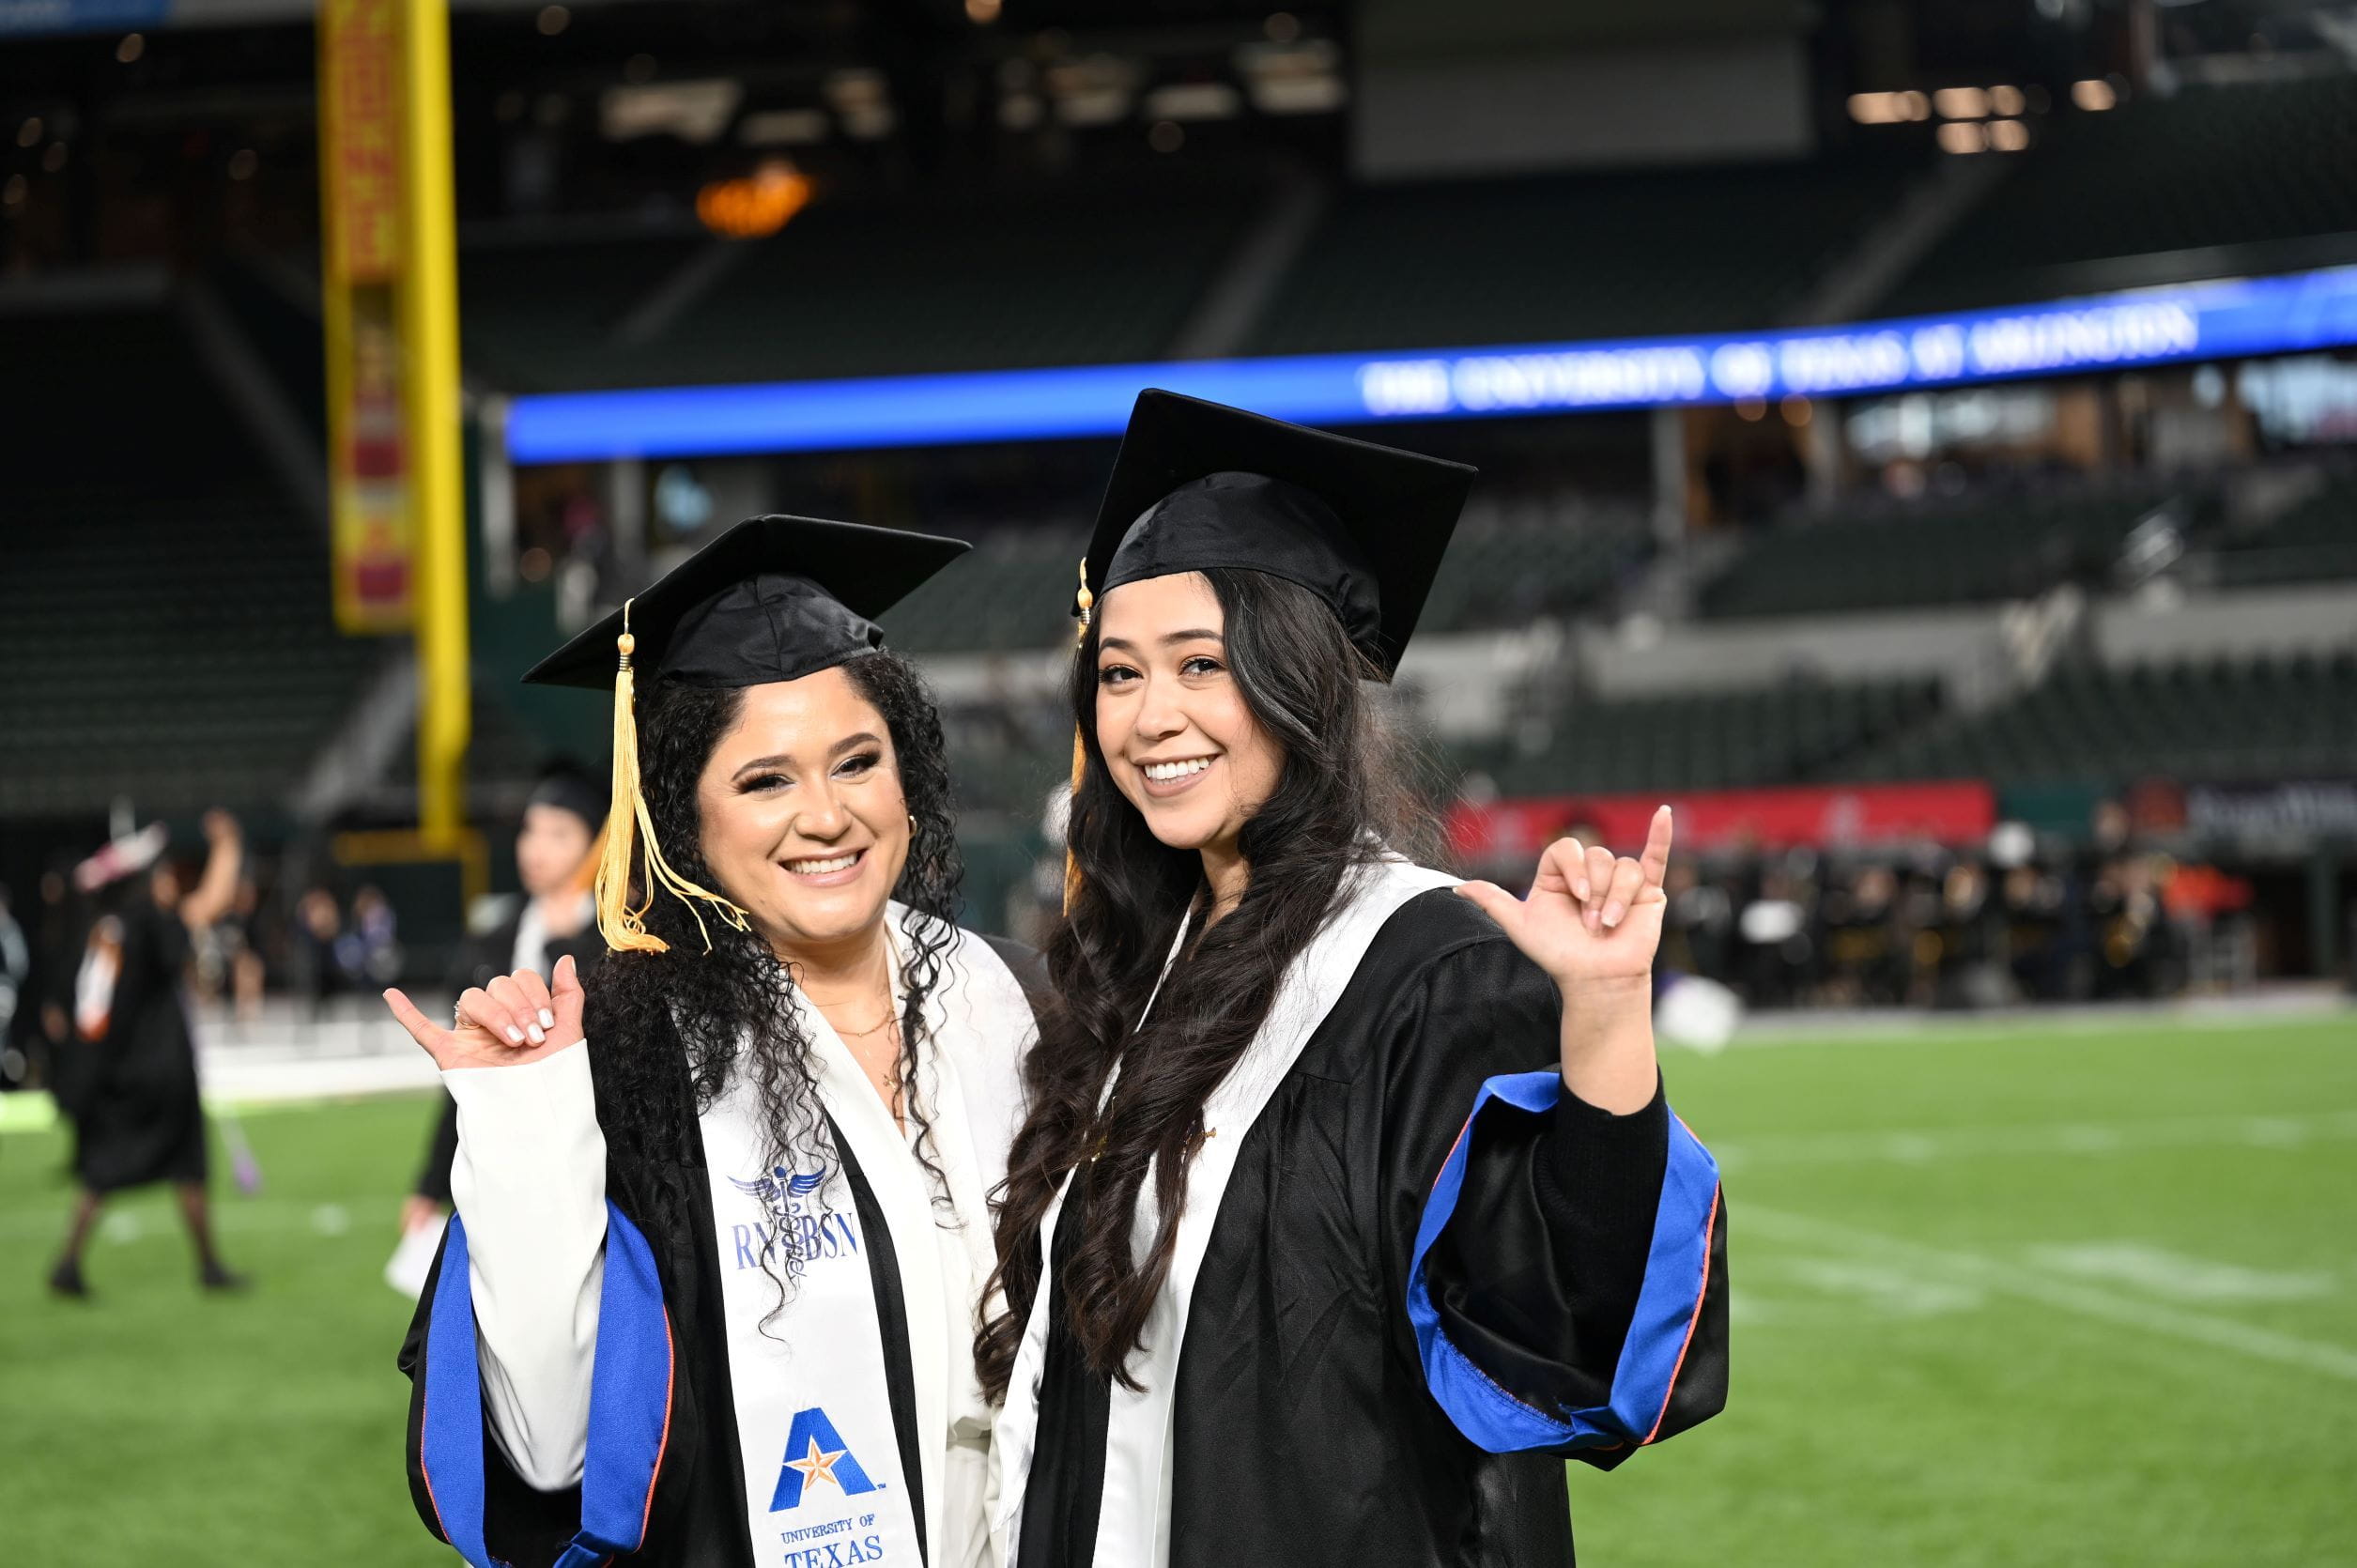 Commencement ceremonies for the Spring 2023 semester will be Friday, May 12." _languageinserted="true